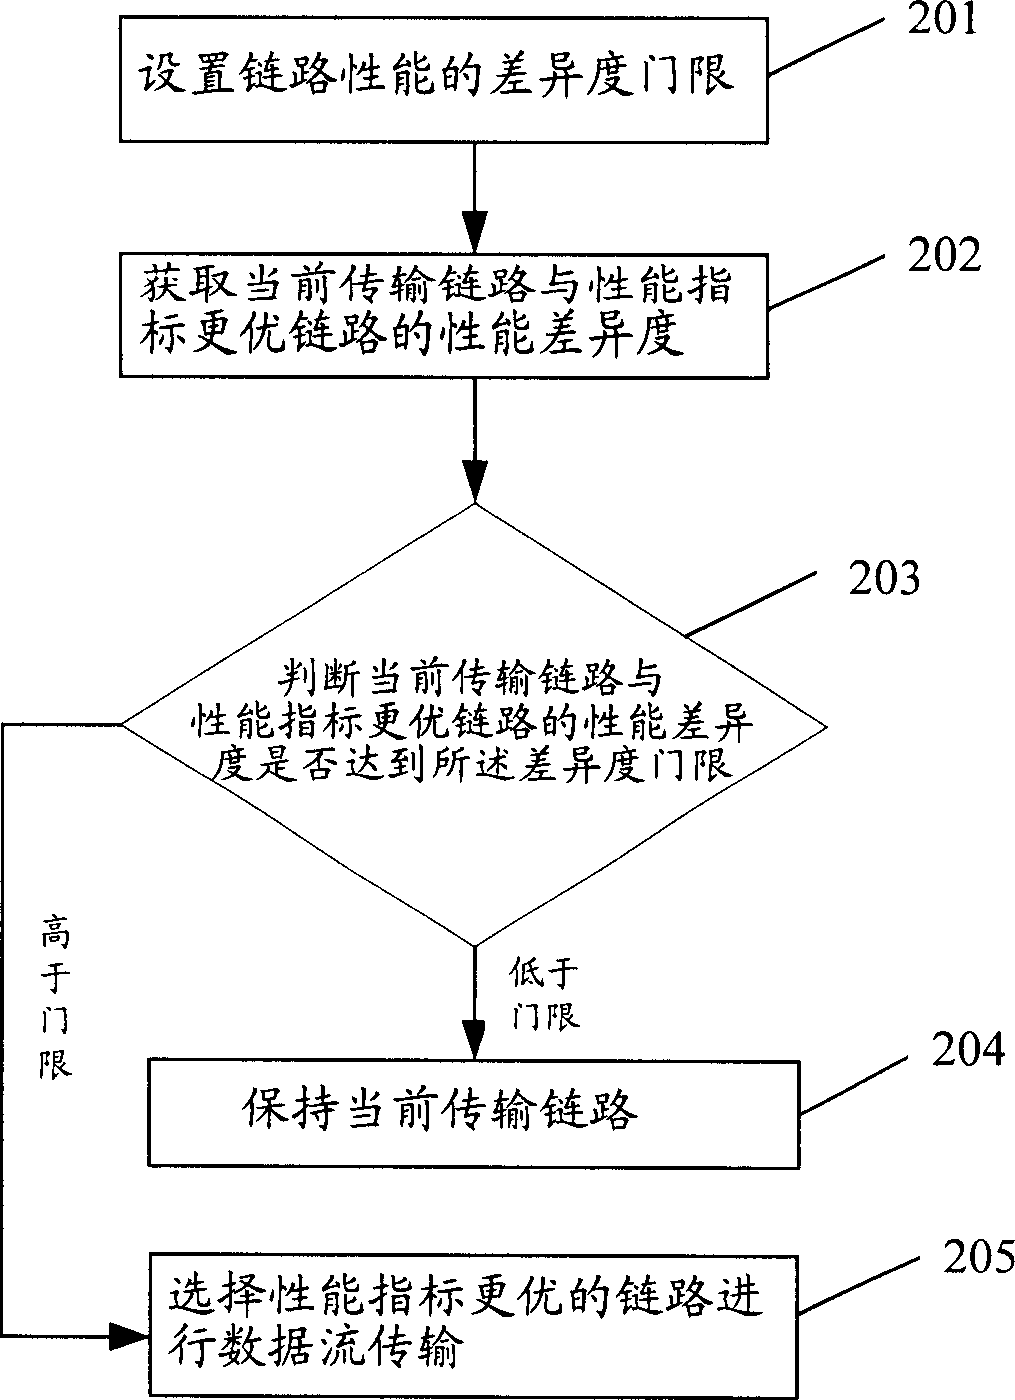 Method for adjusting data stream transmission link and its realizing device